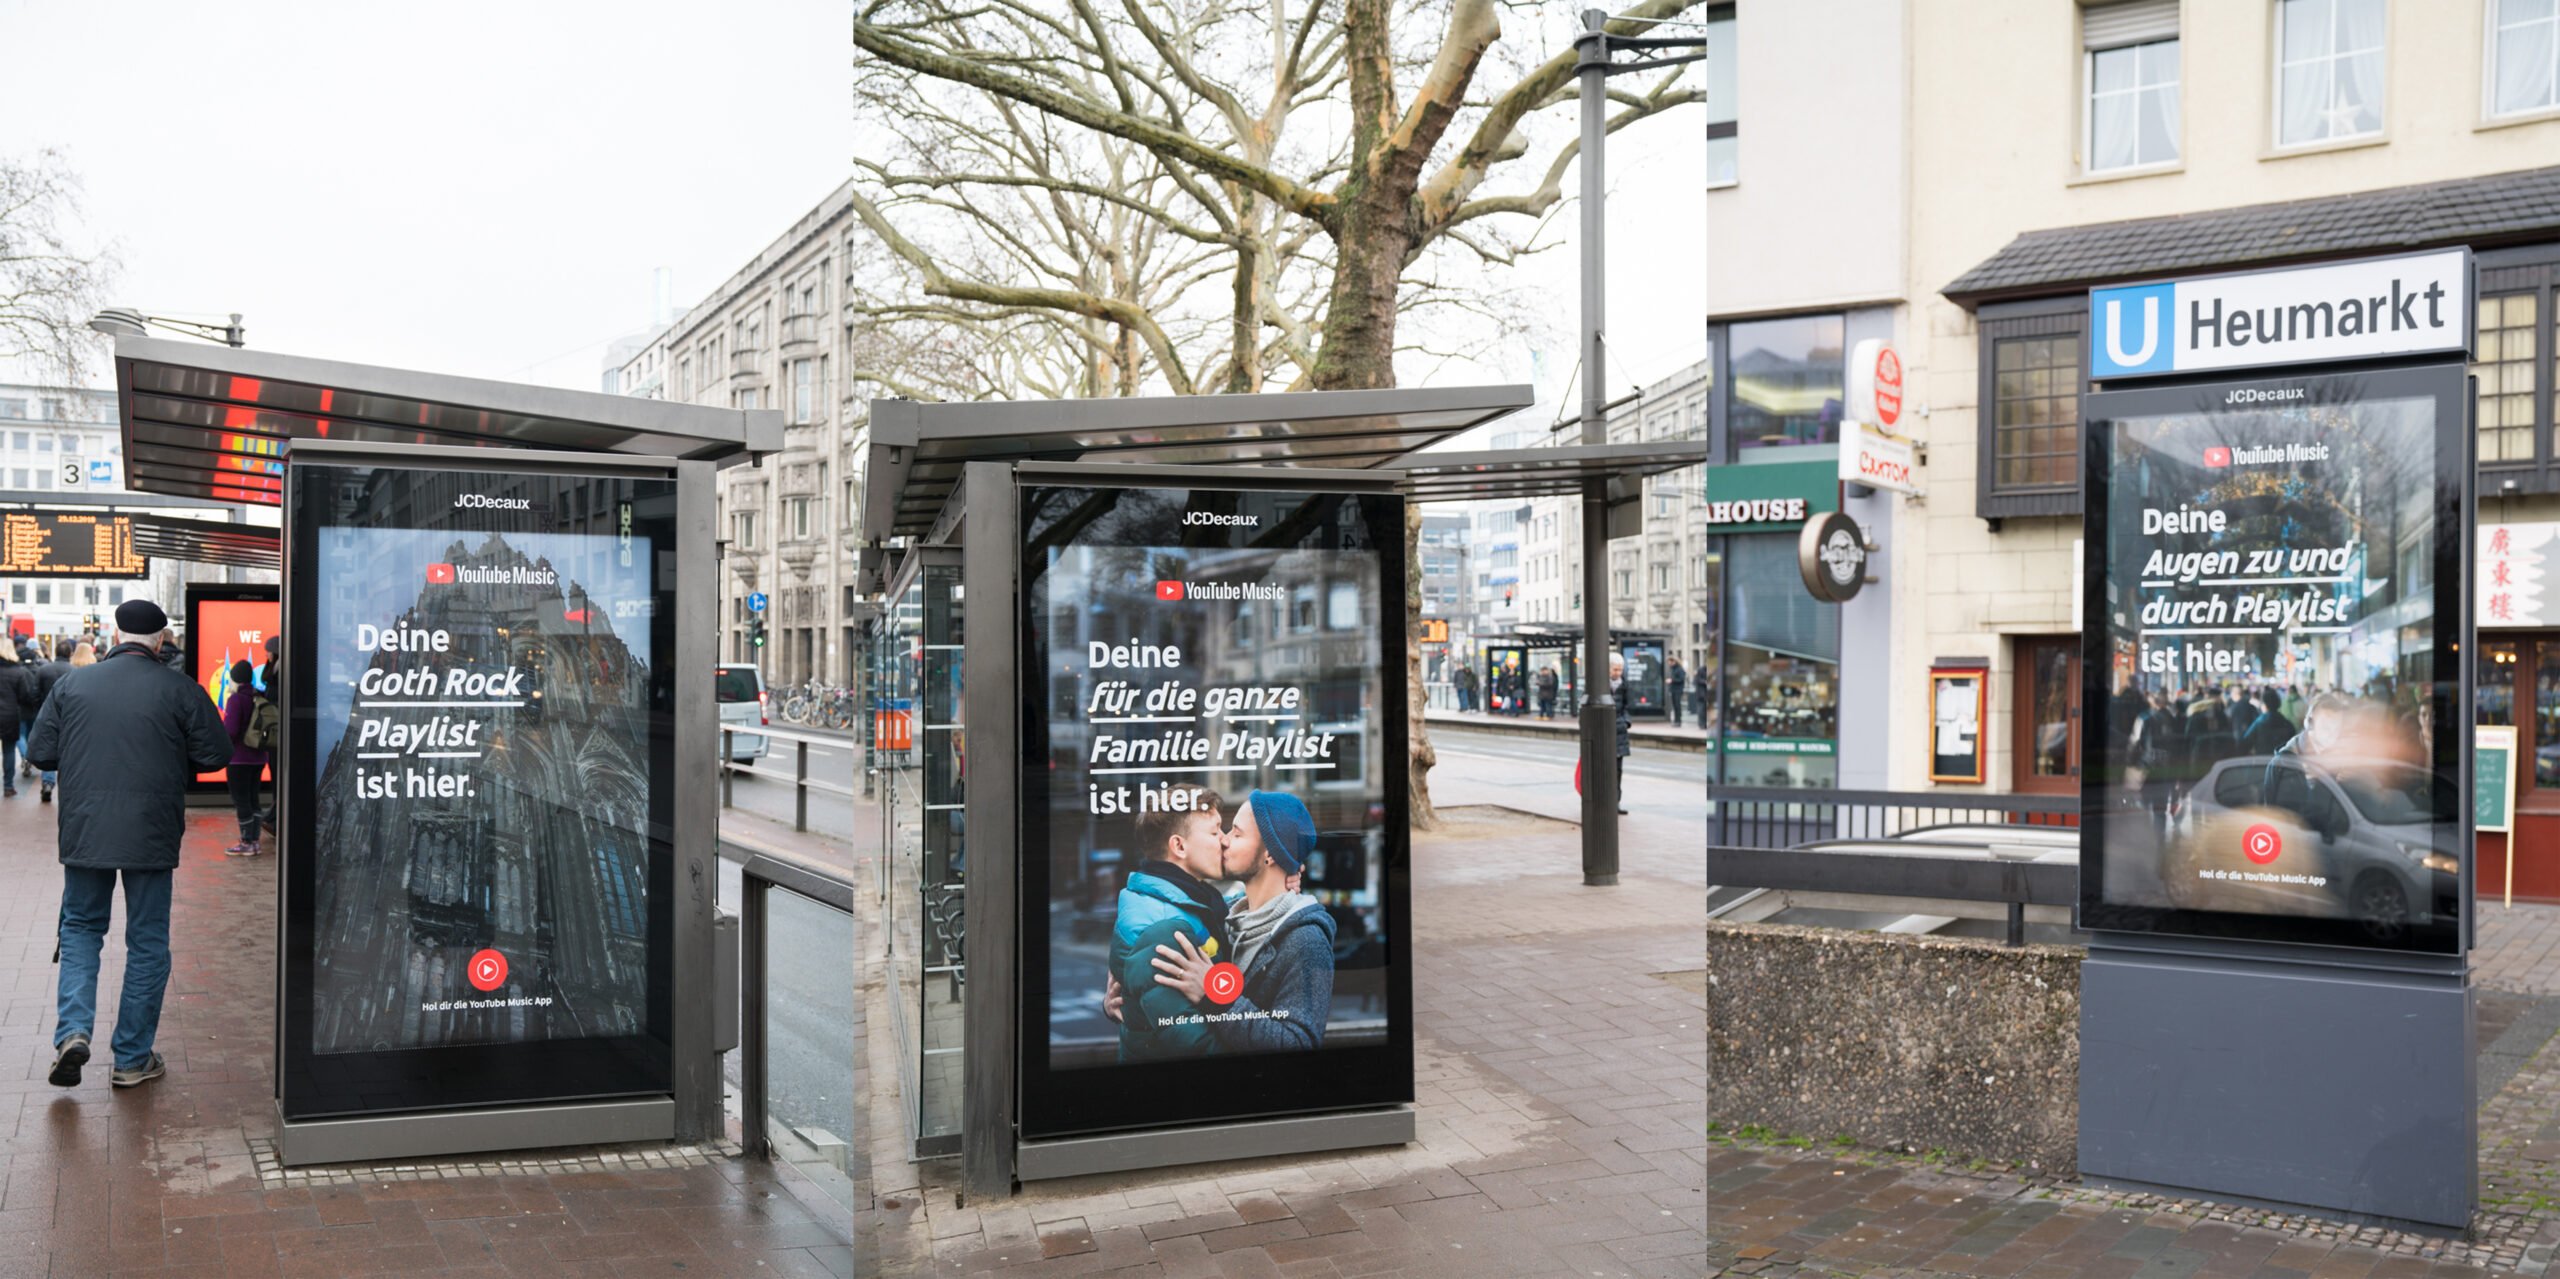 Carsten Behler's photos are featured on bus terminals and other billboards in public spaces in Germany